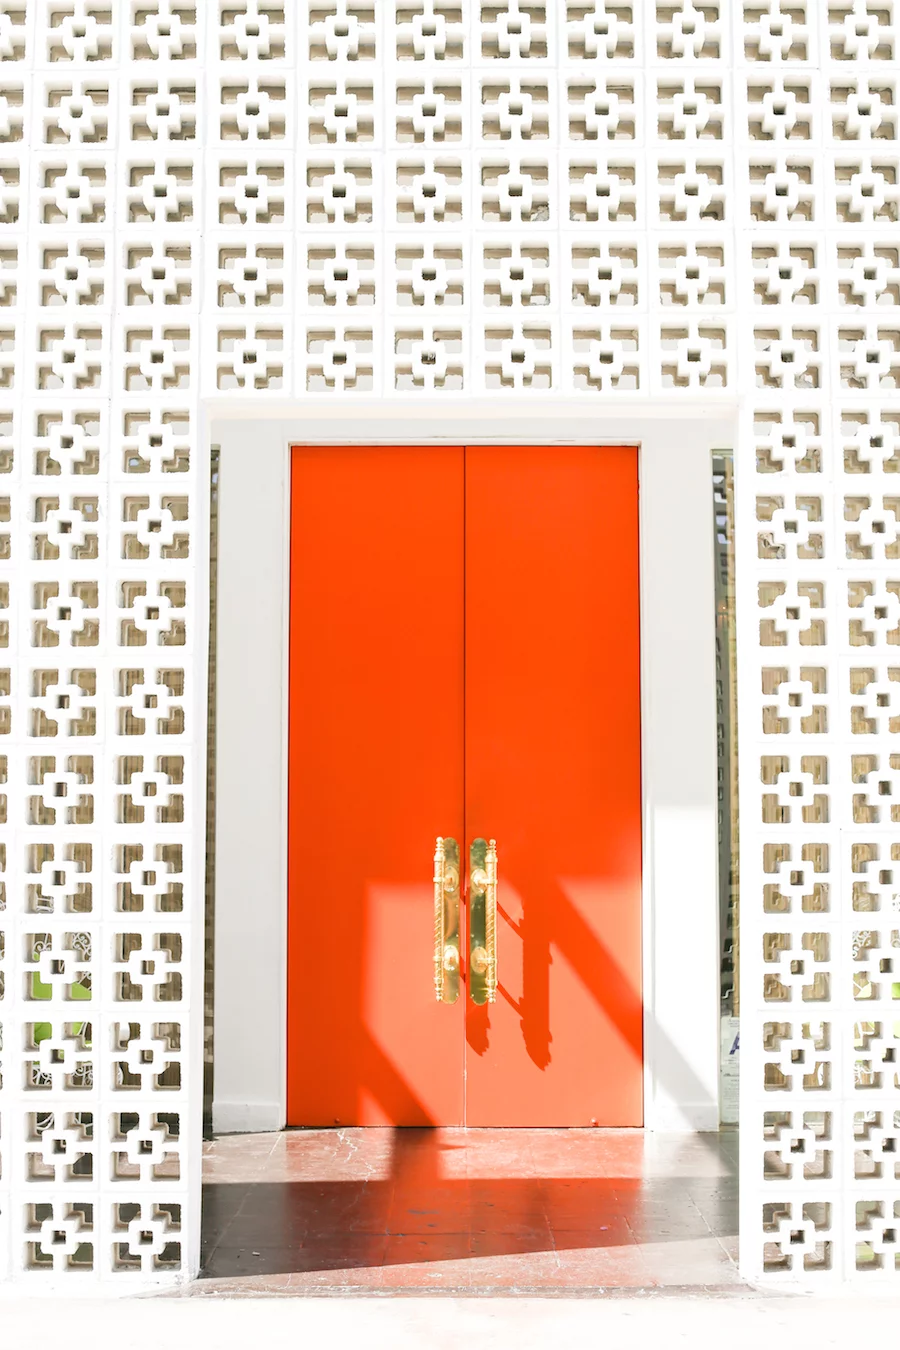 Take a Palm Springs Door Tour to see all the bright & colorful midcentury modern front doors, Instagram Photos, Insta-worthy, Driving Tour, Architecture Tour, Weekend Trip, Palm Springs Guide, Travel Guide, What to do in Palm Springs, Walking Door, Photo Tour, That Pink Door Address, Free Printable Map, Salty Canary 